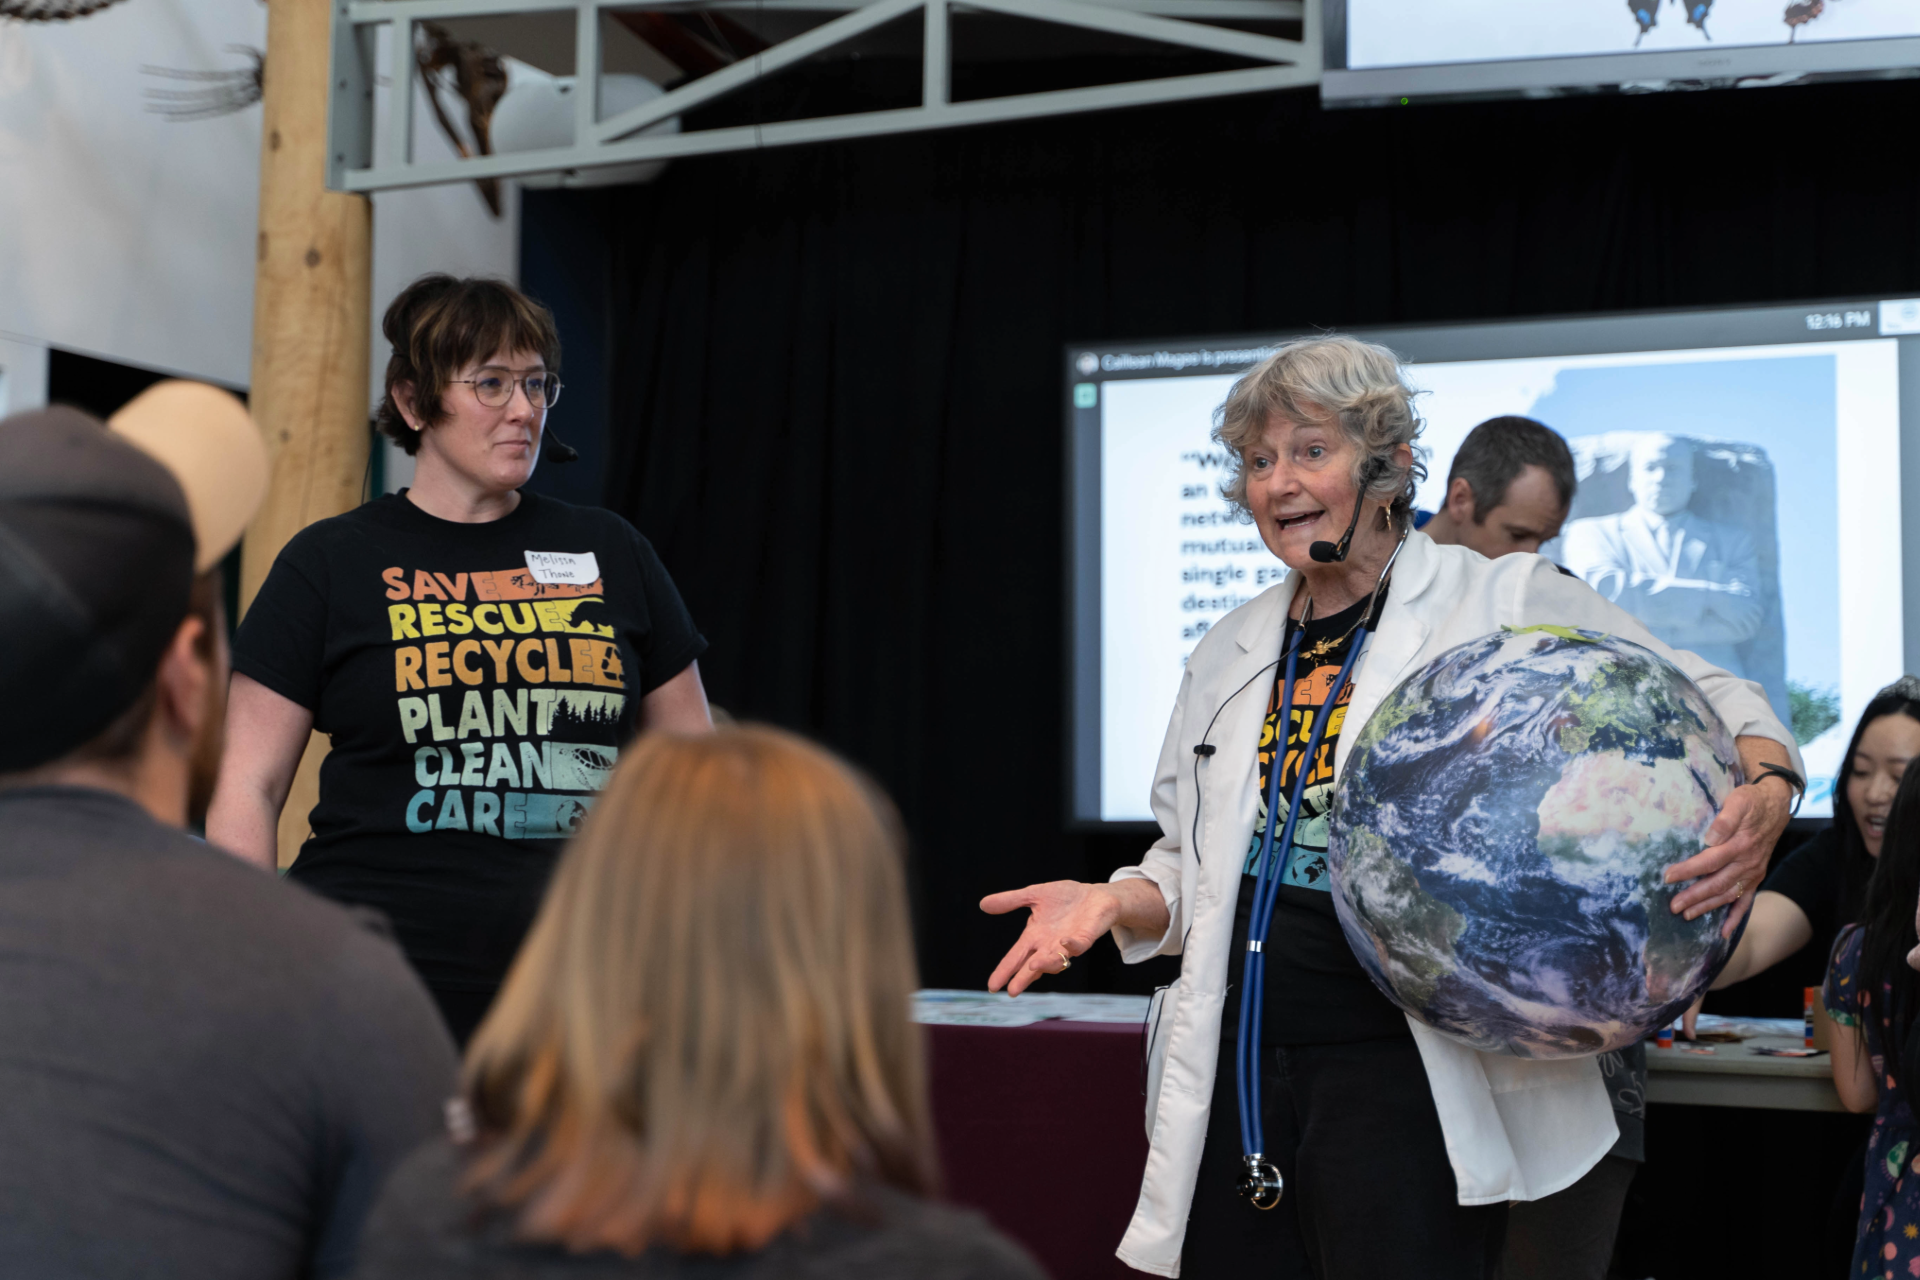 The Science Museum of Minnesota’s Earth Day event on April 20 features community partners
like Dr. Teddie Potter, Director of the Center for Planetary Health and Environmental Justice at the
University of Minnesota, who is helping us understand our changing planet.